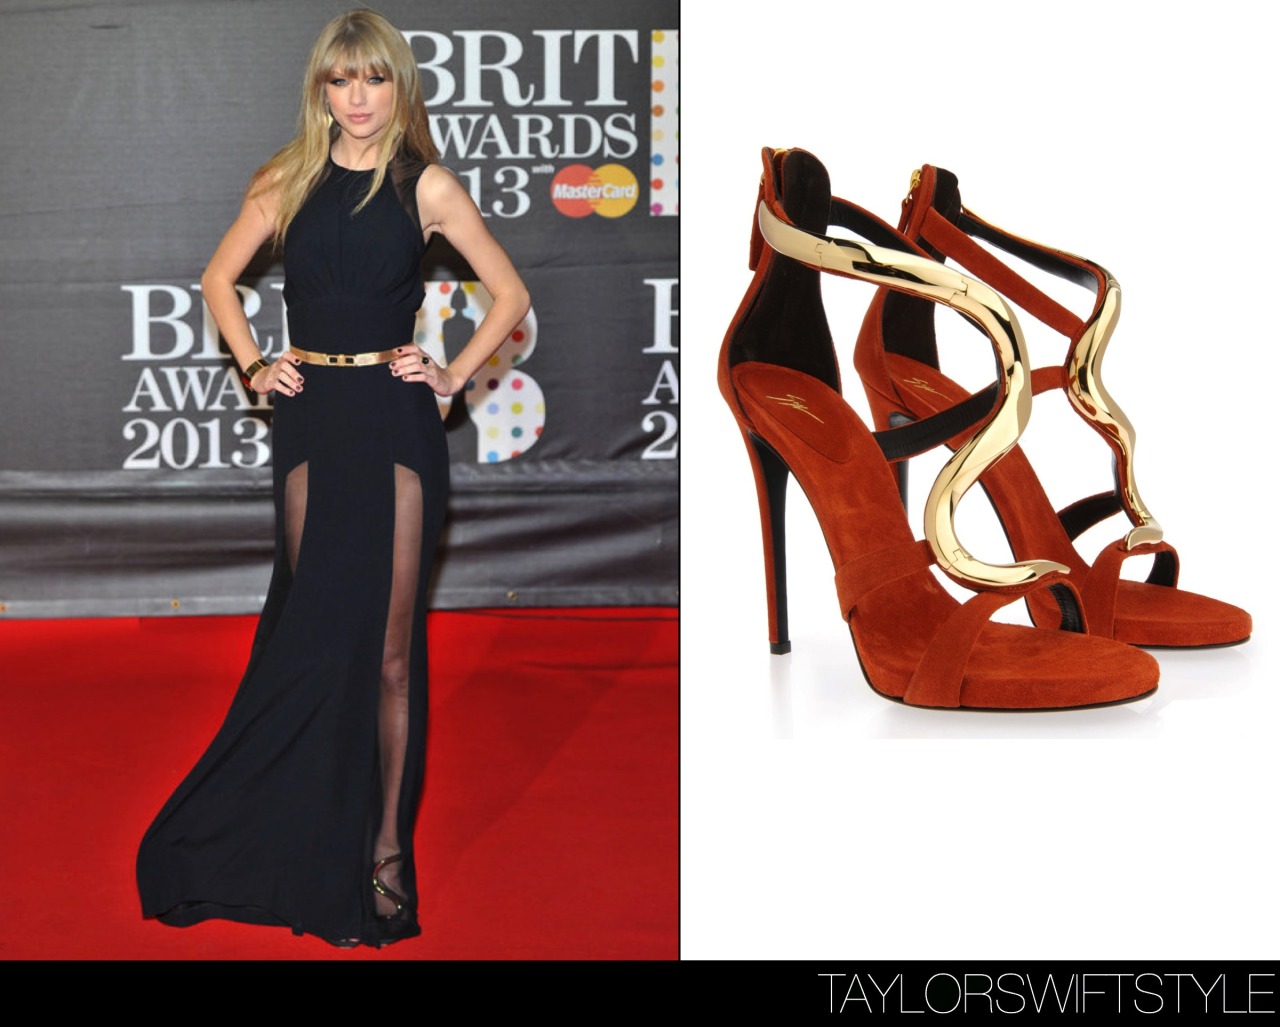 At the 2013 BRIT Awards | London, England | February 20, 2013Giuseppe Zanotti &#8216;Wave Sandal&#8217; - $1,695.00 (orange)It&#8217;s nice to see that Taylor got adventurous with her footwear. I&#8217;d be thrilled if she transferred her loyalty from Choo to Giuseppe for the next few appearances. Worn with: Elie Saab dress